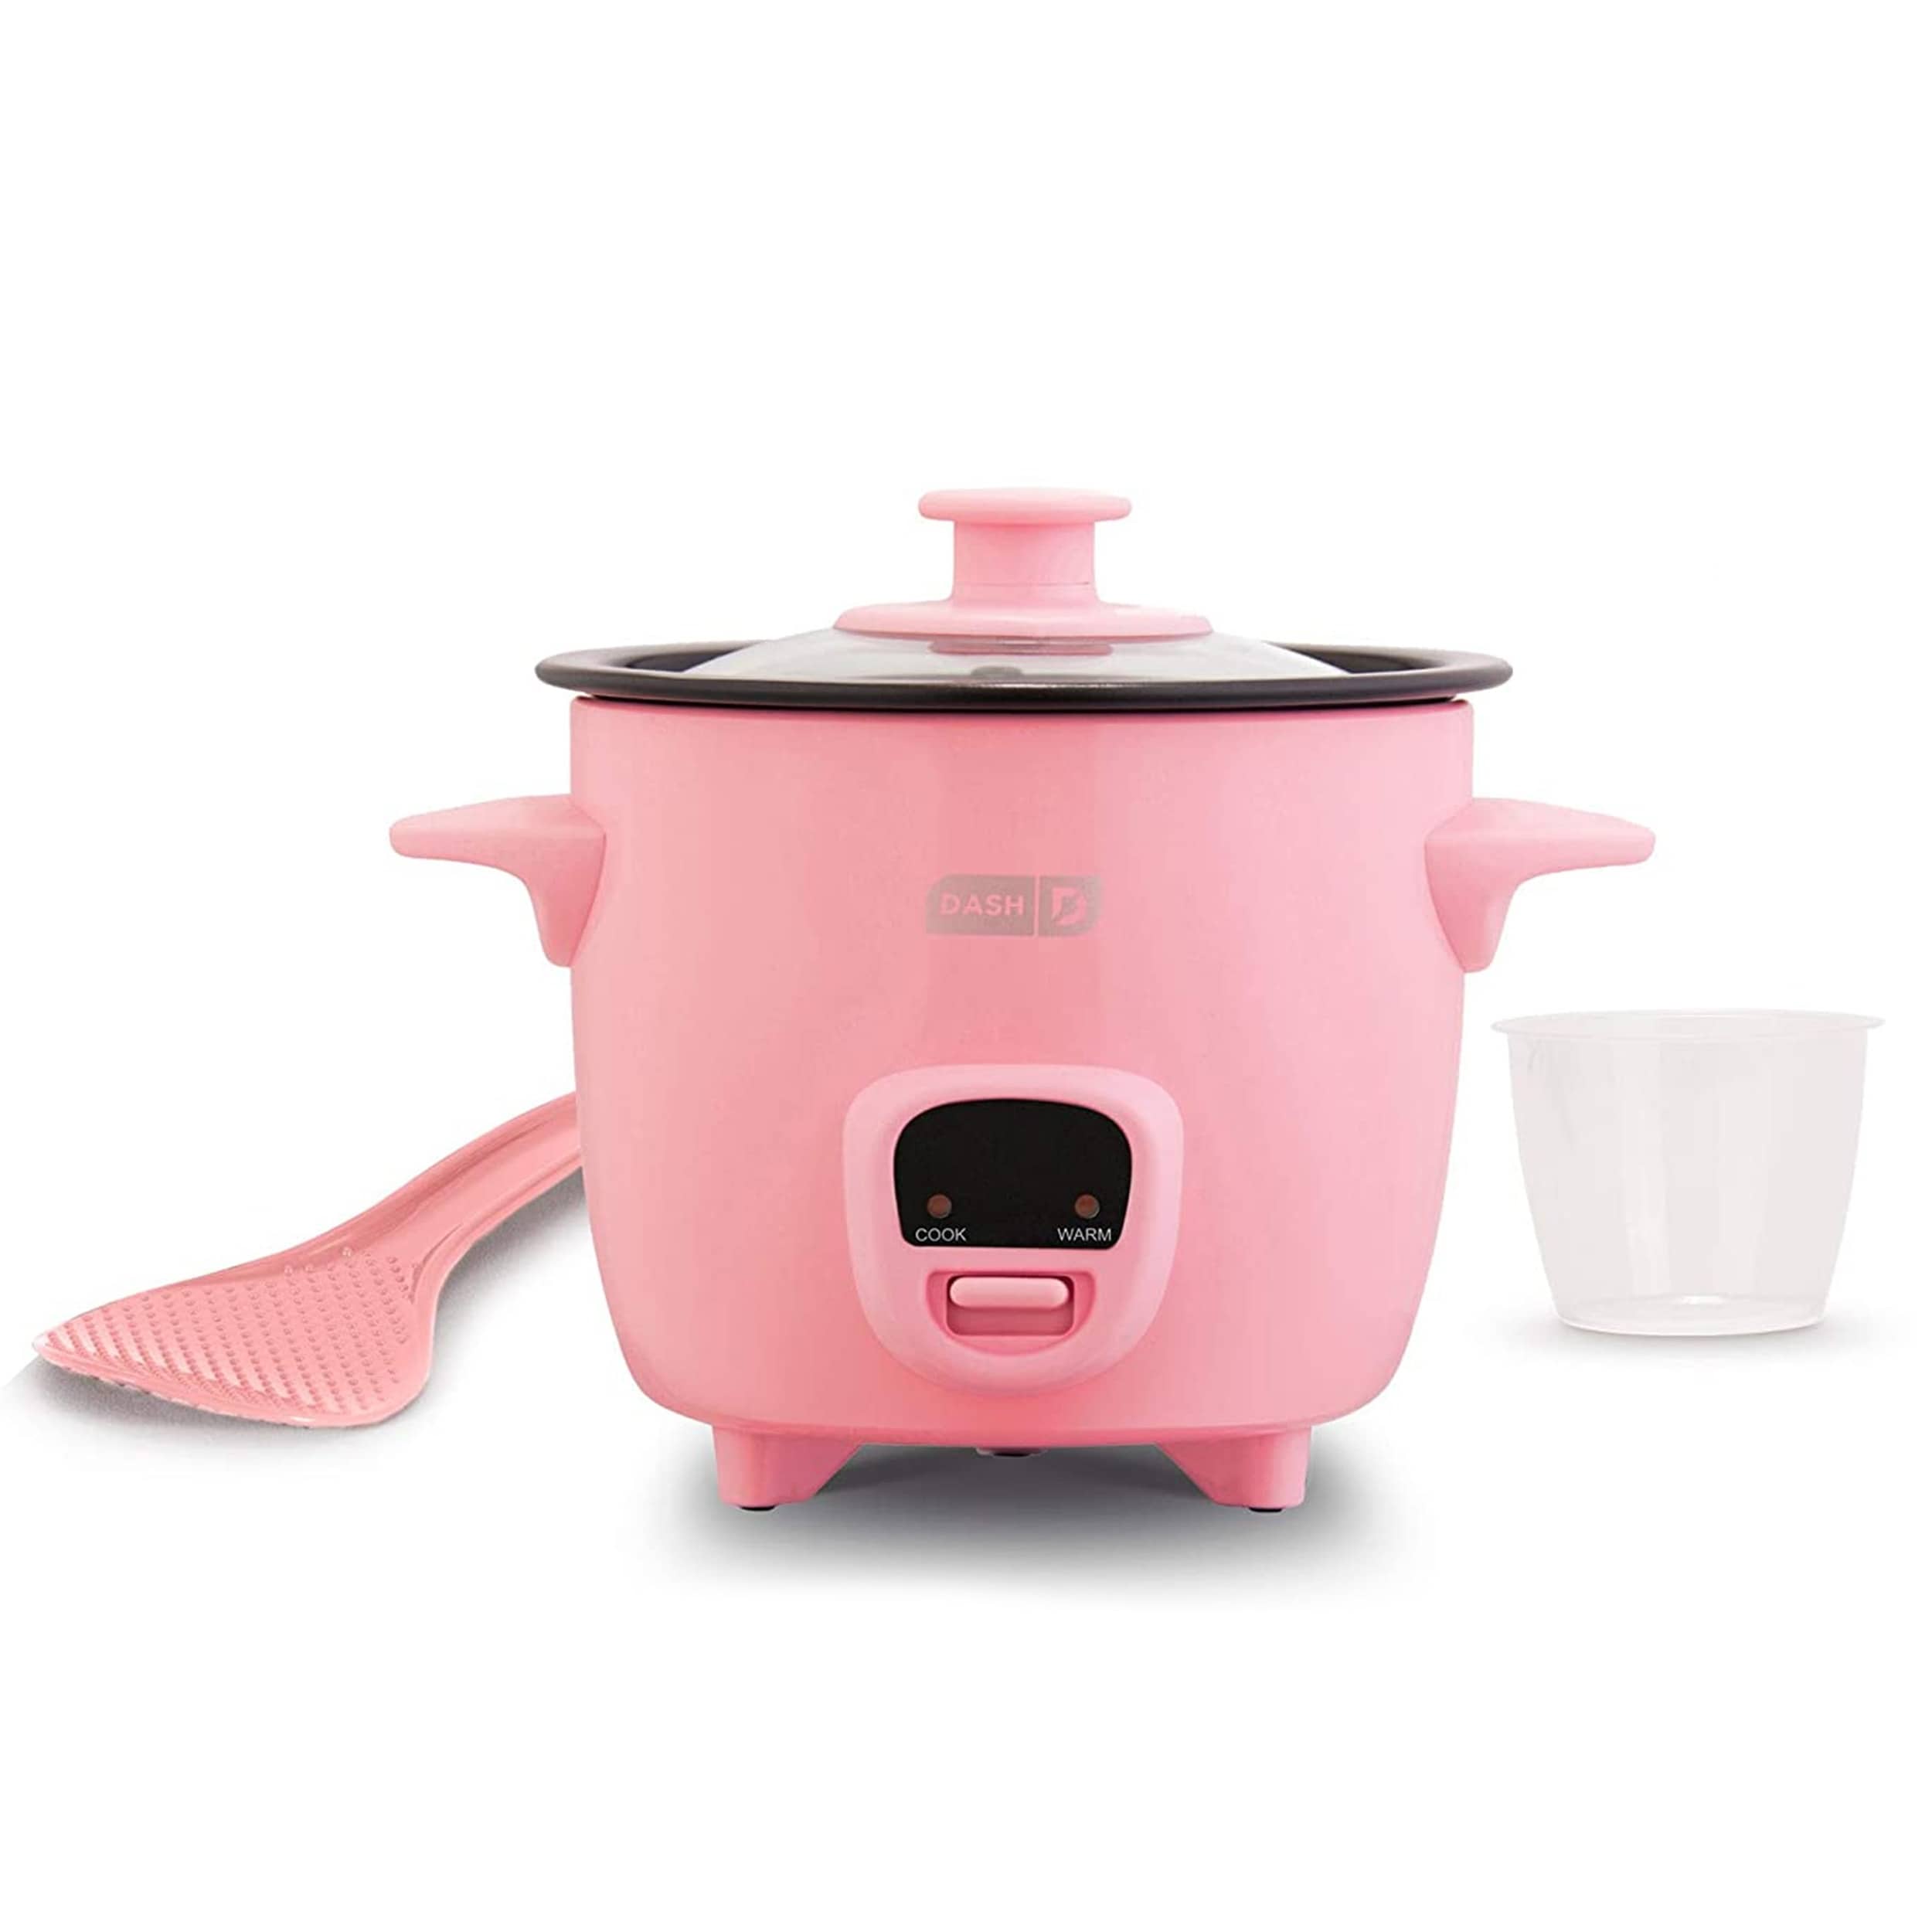 https://ak1.ostkcdn.com/images/products/is/images/direct/81daa1aef96221f130f1575025340be7a110dbd8/Dash-Mini-16-Ounce-Rice-Cooker-in-Pink-with-Keep-Warm-Setting.jpg